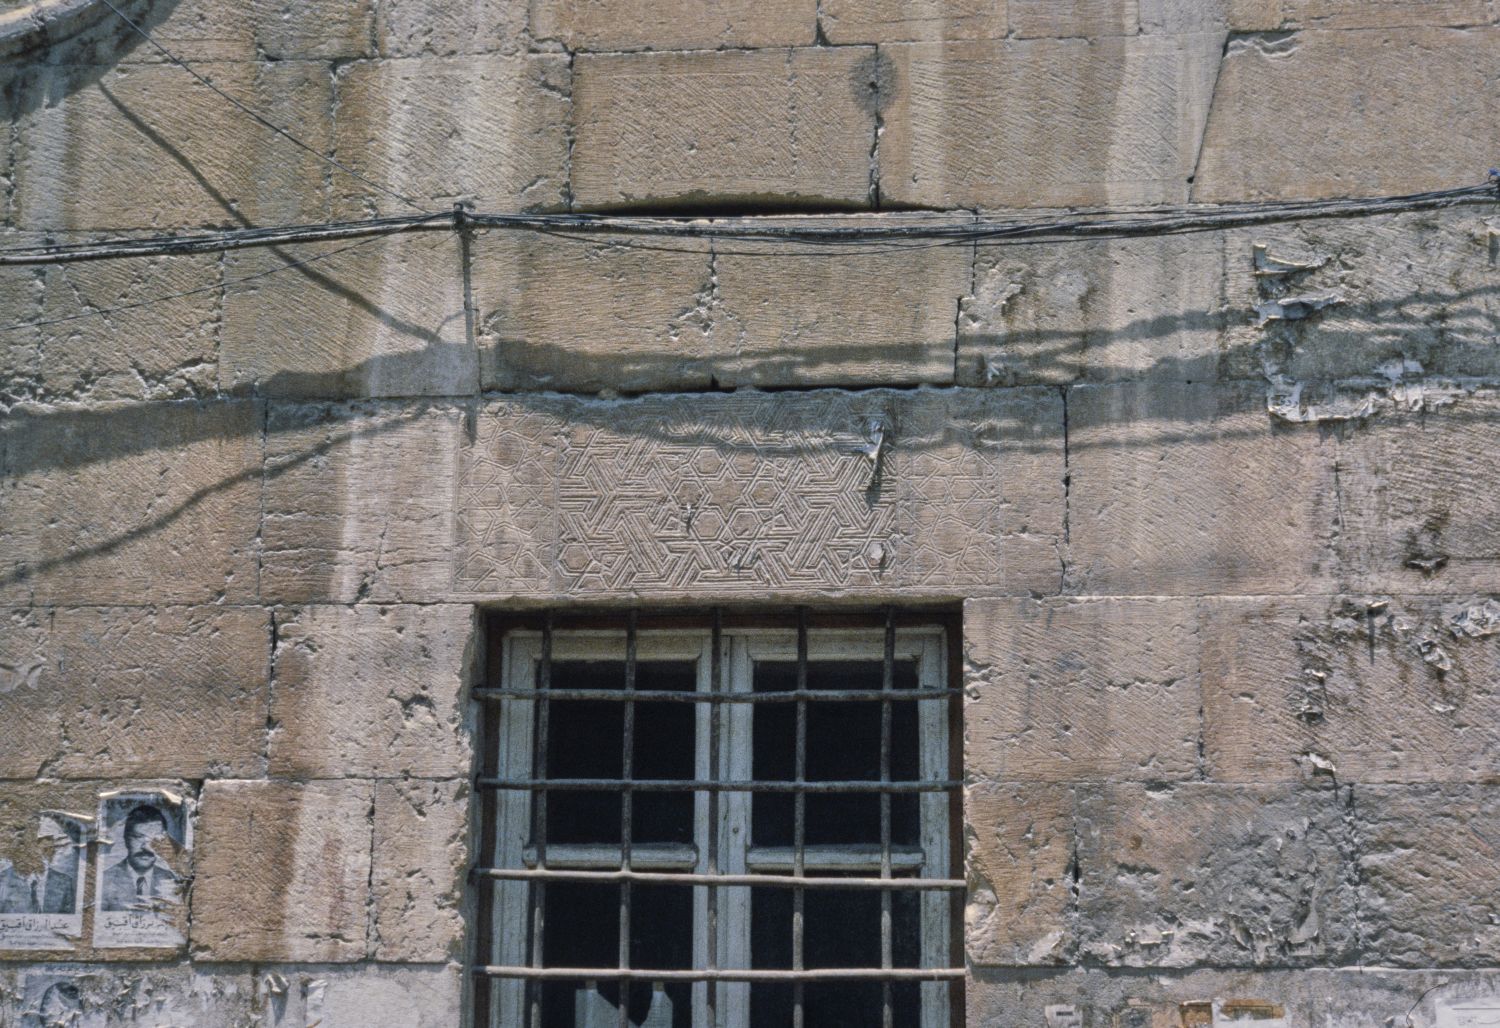 View of window with decoration over the lintel.&nbsp;